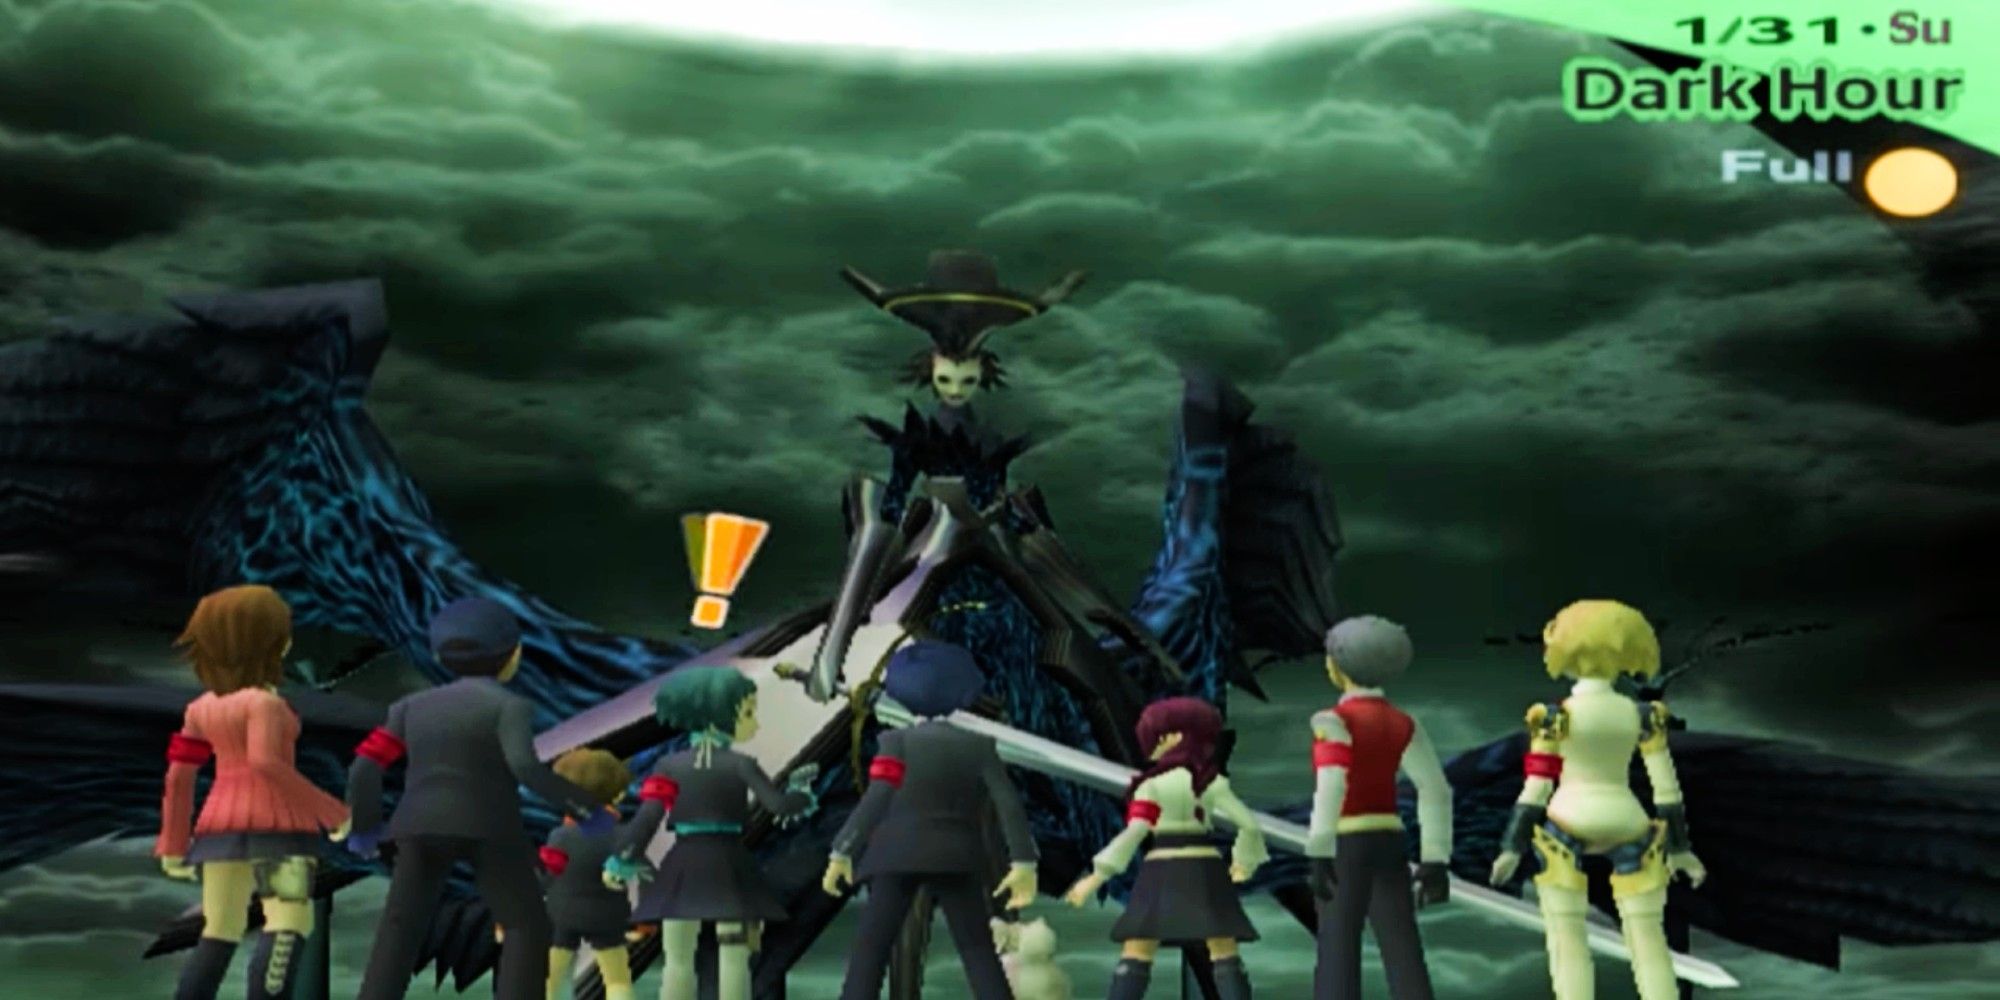 Nyx Avatar towers over the party with dark overcase and a brilliant bright moon are overhead- Persona 3